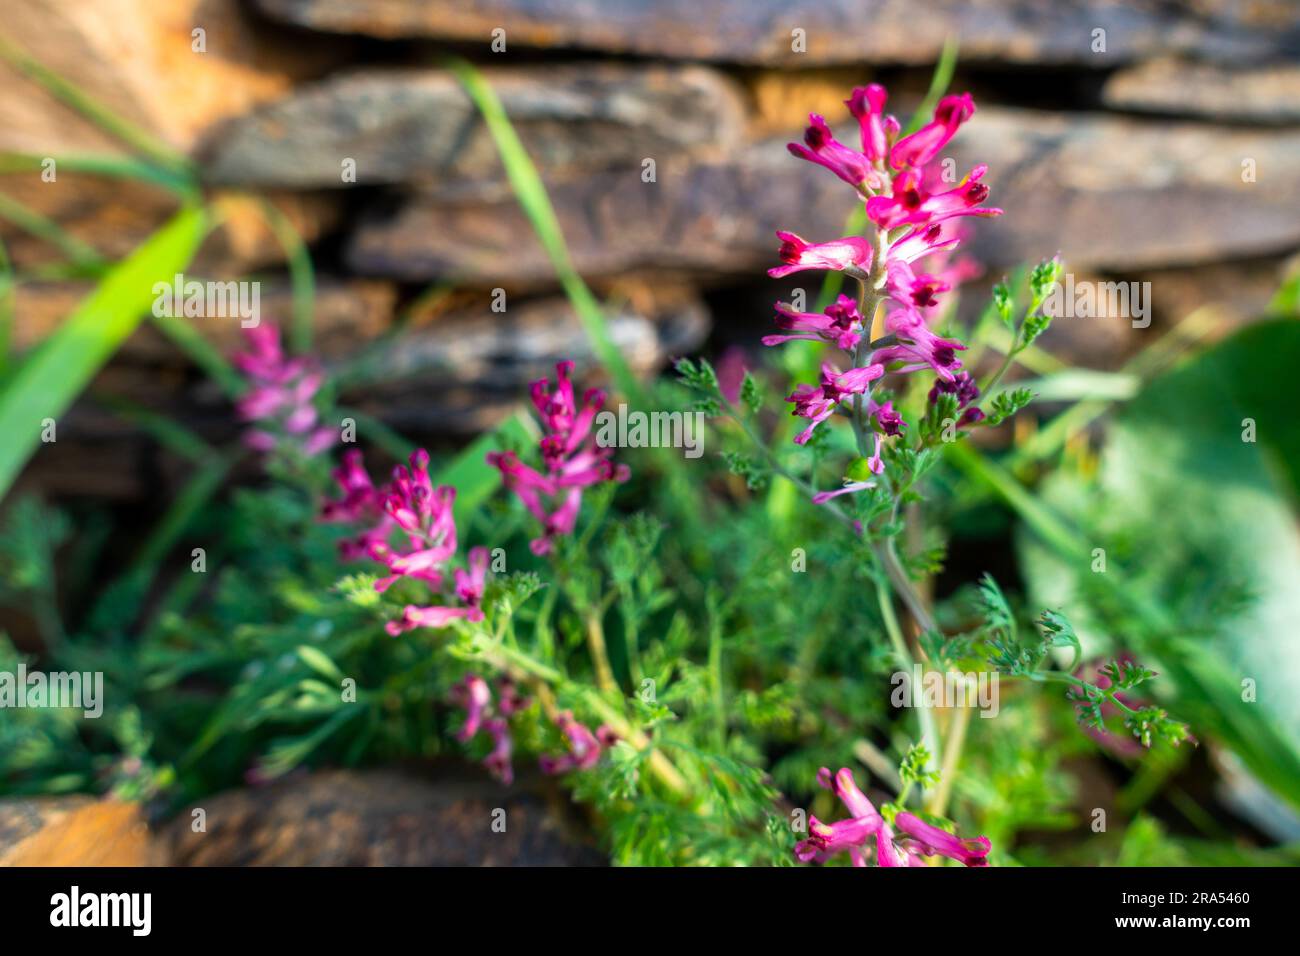 Fumaria officinalis, the common fumitory plant with purple flowers. Himalayan Uttarakhand India. Stock Photo